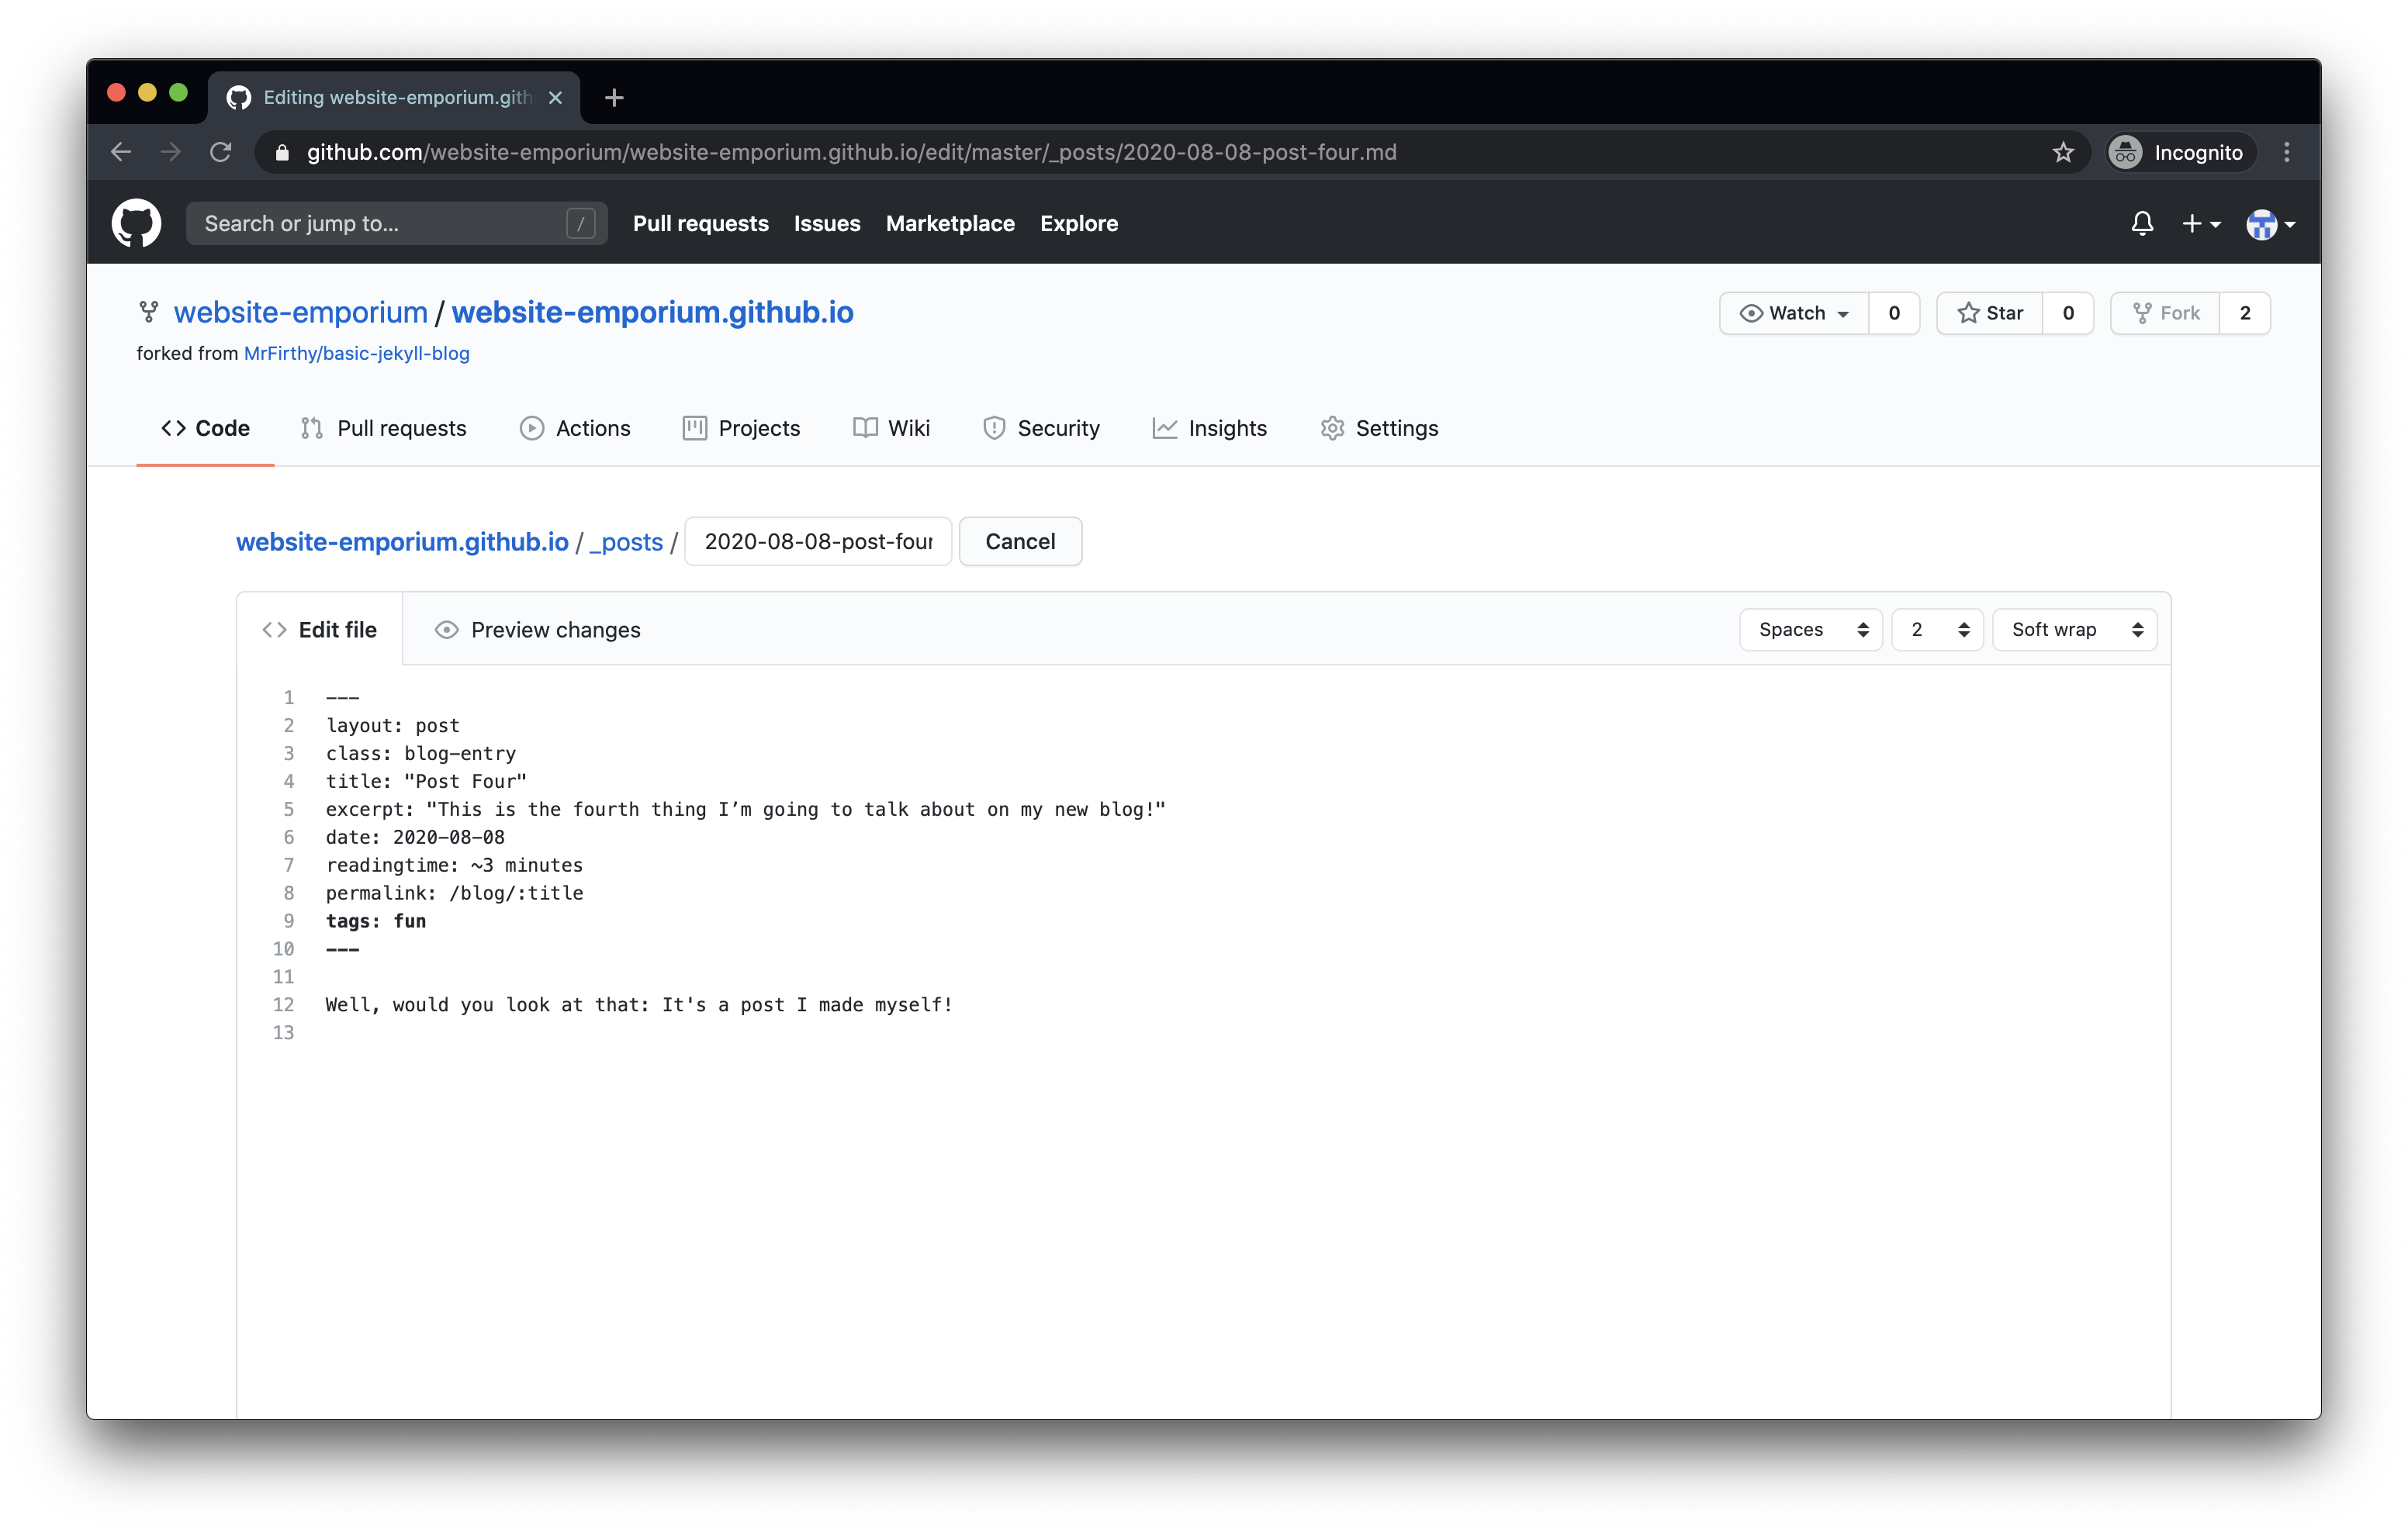 The contents of a new blog post on Github